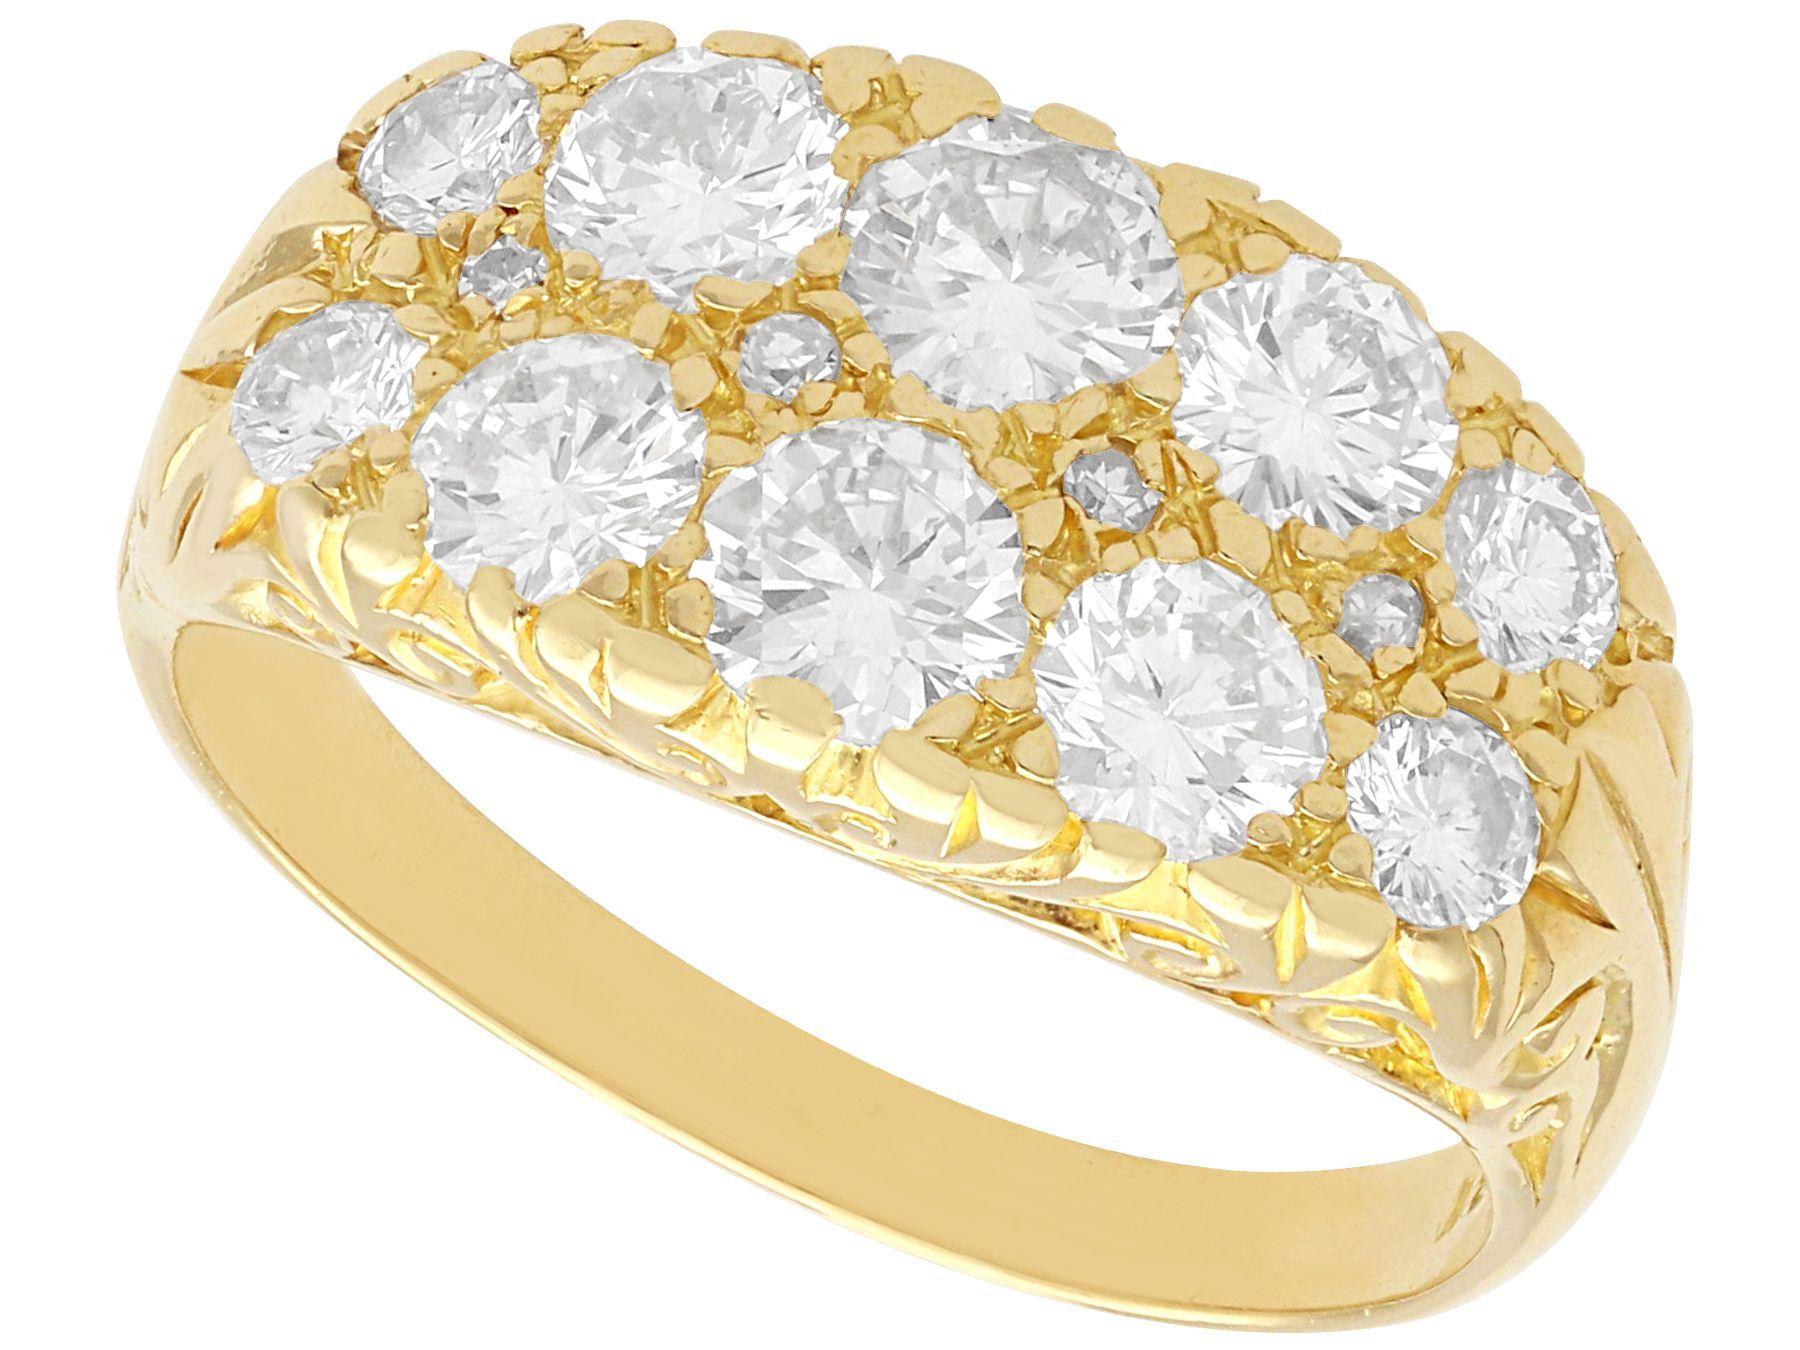 A stunning vintage 1940's 2.45 carat diamond and 18 karat yellow gold dress ring; part of our diverse diamond jewellery and estate jewelry collections

This stunning, fine and impressive vintage diamond ring has been crafted in 18k yellow gold.

The